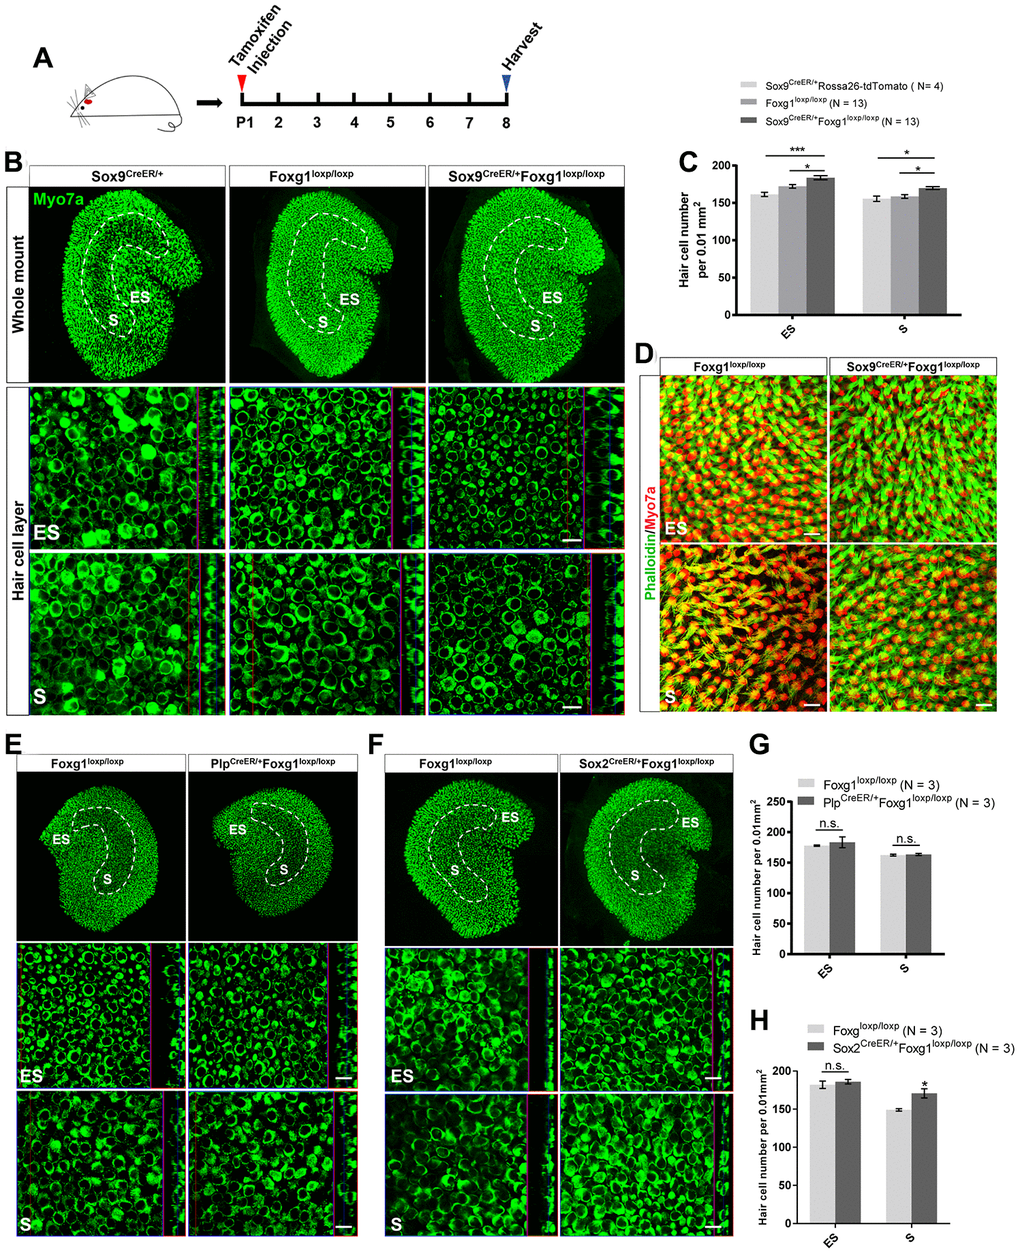 cKD of Foxg1 in Sox9+ SCs led to increased HCs number in the mouse utricle at P08. (A) Tamoxifen was injected into P01 mice to knock down Foxg1 in Sox9+ SCs, and the utricle was harvested at P08. (B) Immunofluorescence staining with anti-Myo7a (green) antibodies in the utricle of P08 Sox9CreER/+, Foxg1loxp/loxp, and Sox9CreER/+Foxg1loxp/loxp cKD mice. (C) Quantification of HCs in the ES and S regions of the utricle. *p D) Immunofluorescence staining with phalloidin (green) in the utricle of P08 Foxg1 cKD and control mice. (E, F) Immunofluorescence staining with anti-Myo7a (green) antibodies in the utricle from P8 PlpCreER/+Foxg1loxp/loxp (E) and Sox2CreER/+Foxg1loxp/loxp mice (F). Foxg1loxp/loxp mice were used as the control mice. (G, H) Quantification of the total numbers of HCs in the ES and S regions of the utricle from the above mice. *p 